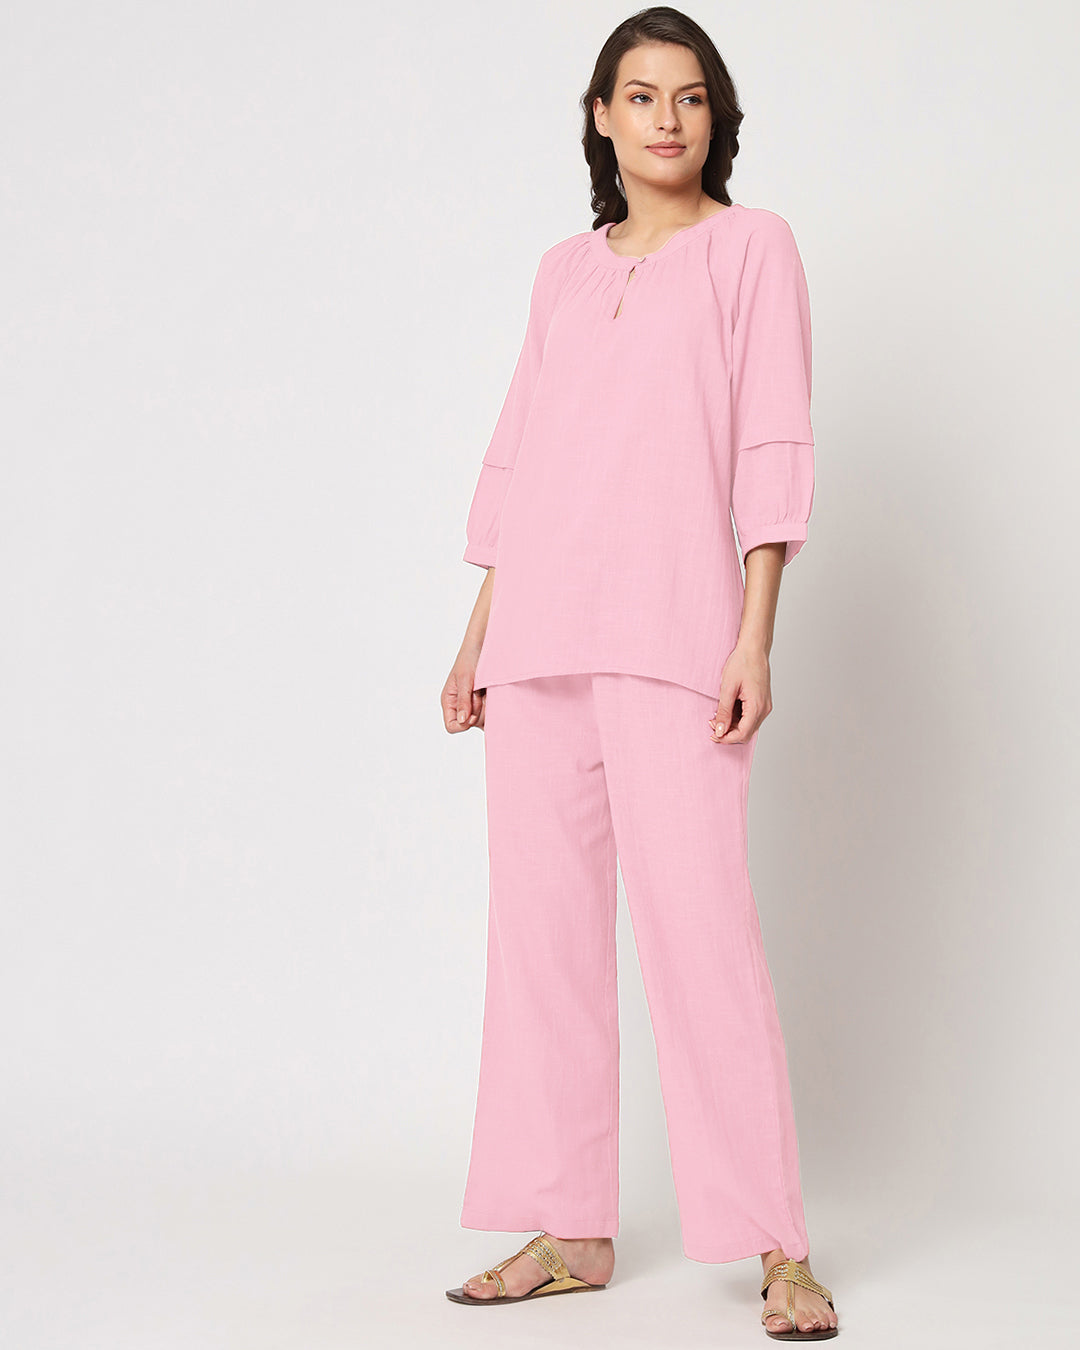 Pink Mist Button Neck Solid Top (Without Bottoms)